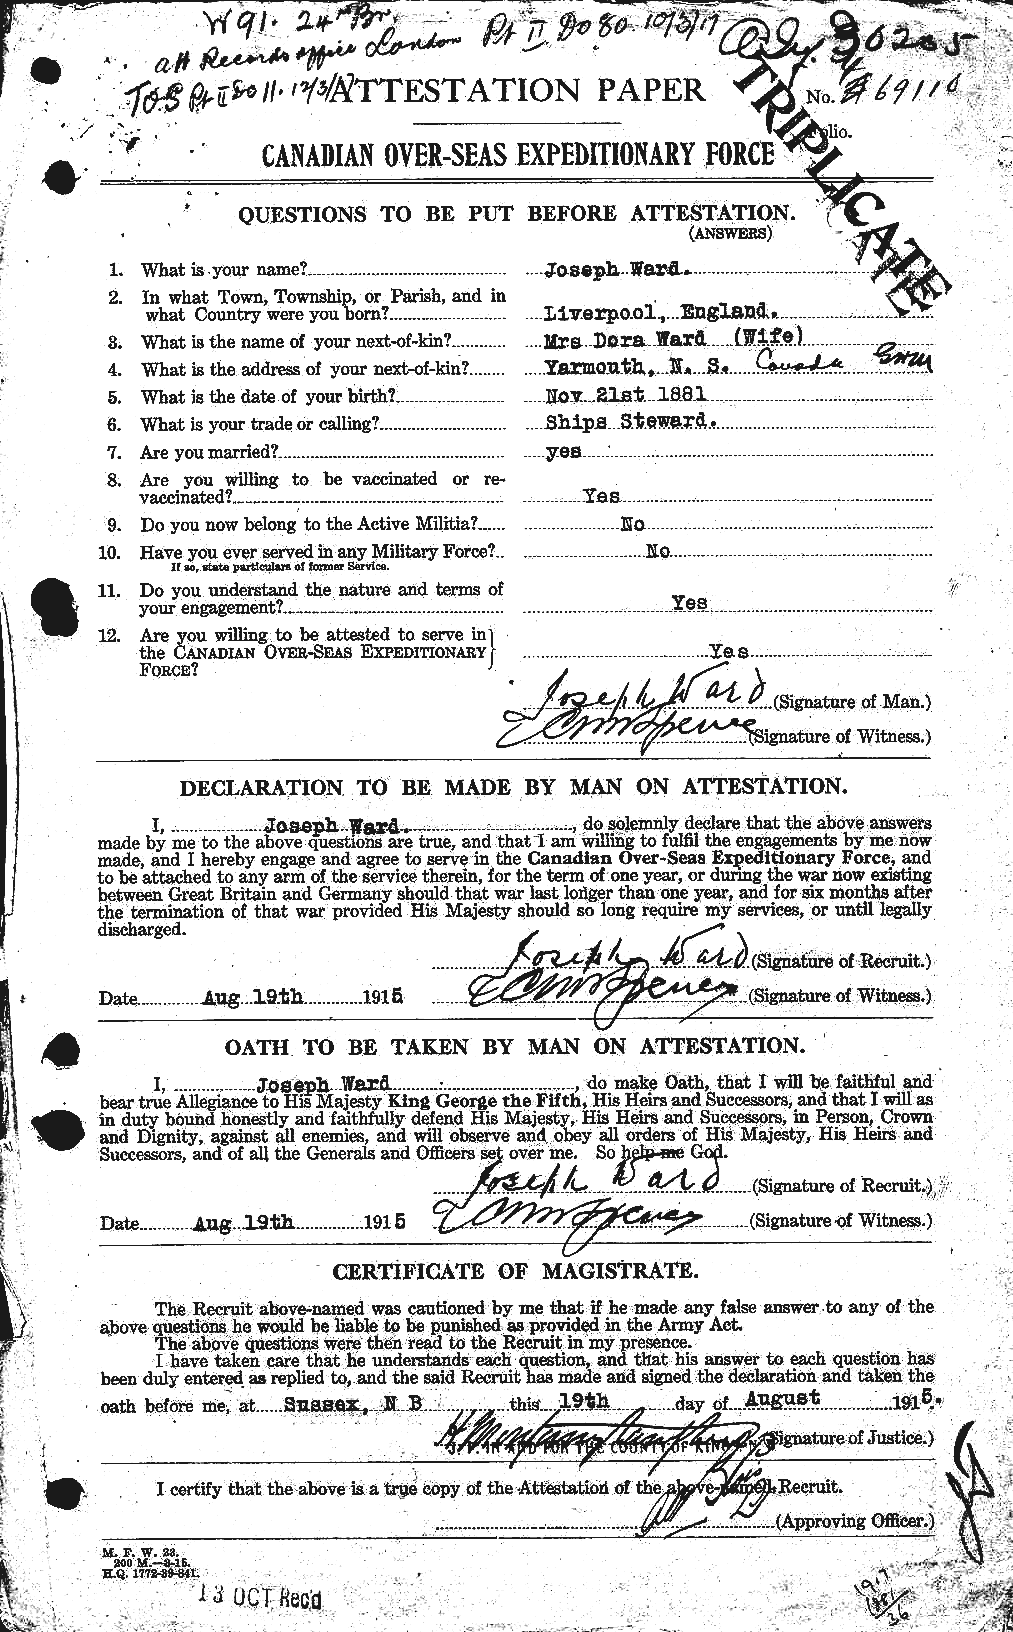 Personnel Records of the First World War - CEF 659556a